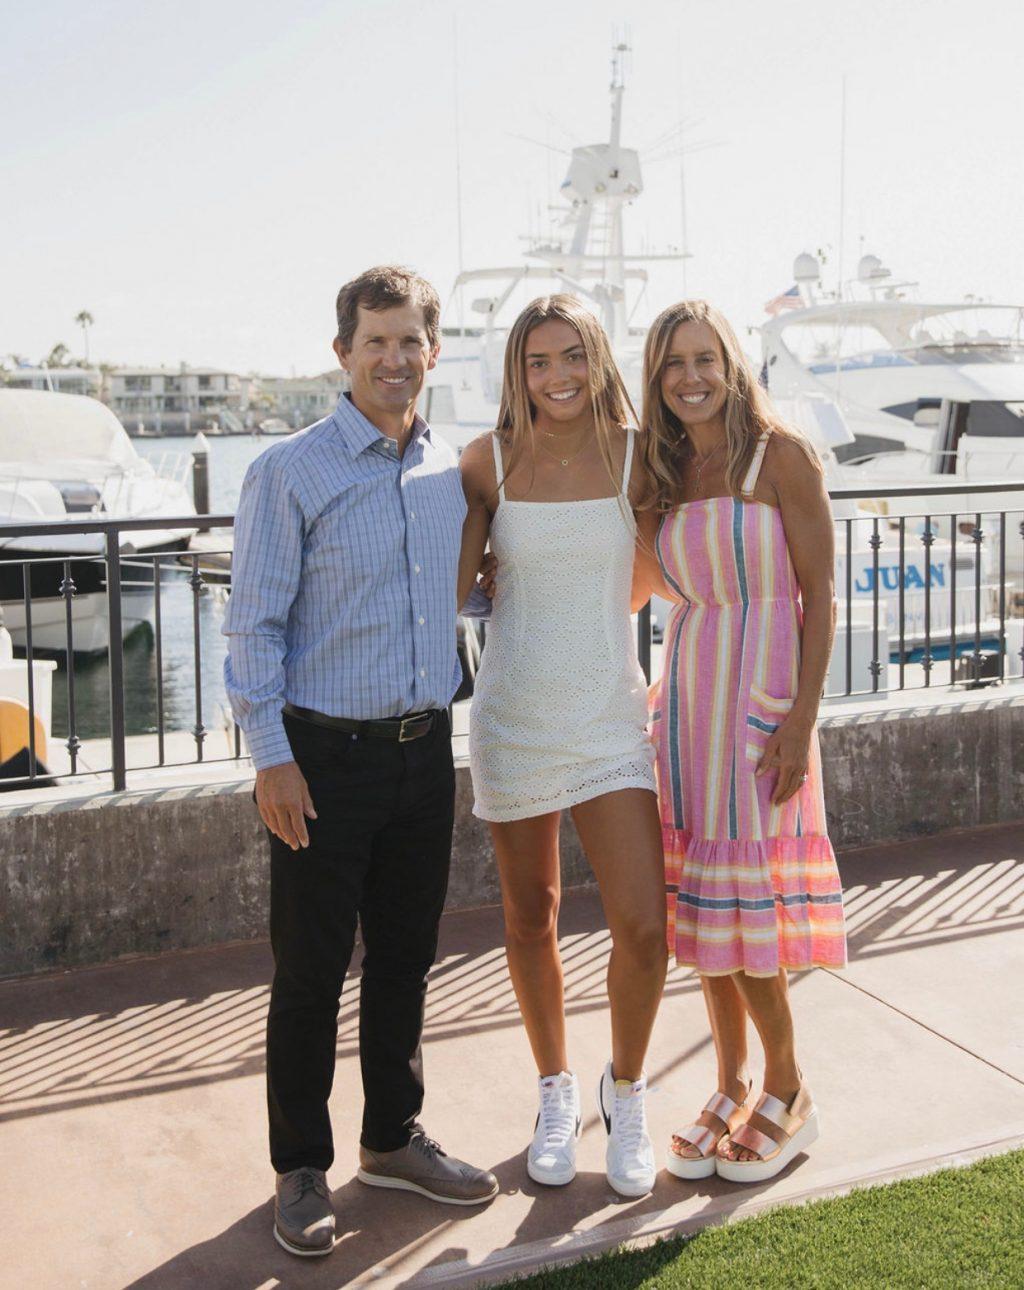 Ianni poses with her parents at the Balboa Bay Club in Newport Beach, Calif., in July. While Ianni said she is currently living at home with her parents in Newport Beach, she is excited to move to the Malibu campus next fall.